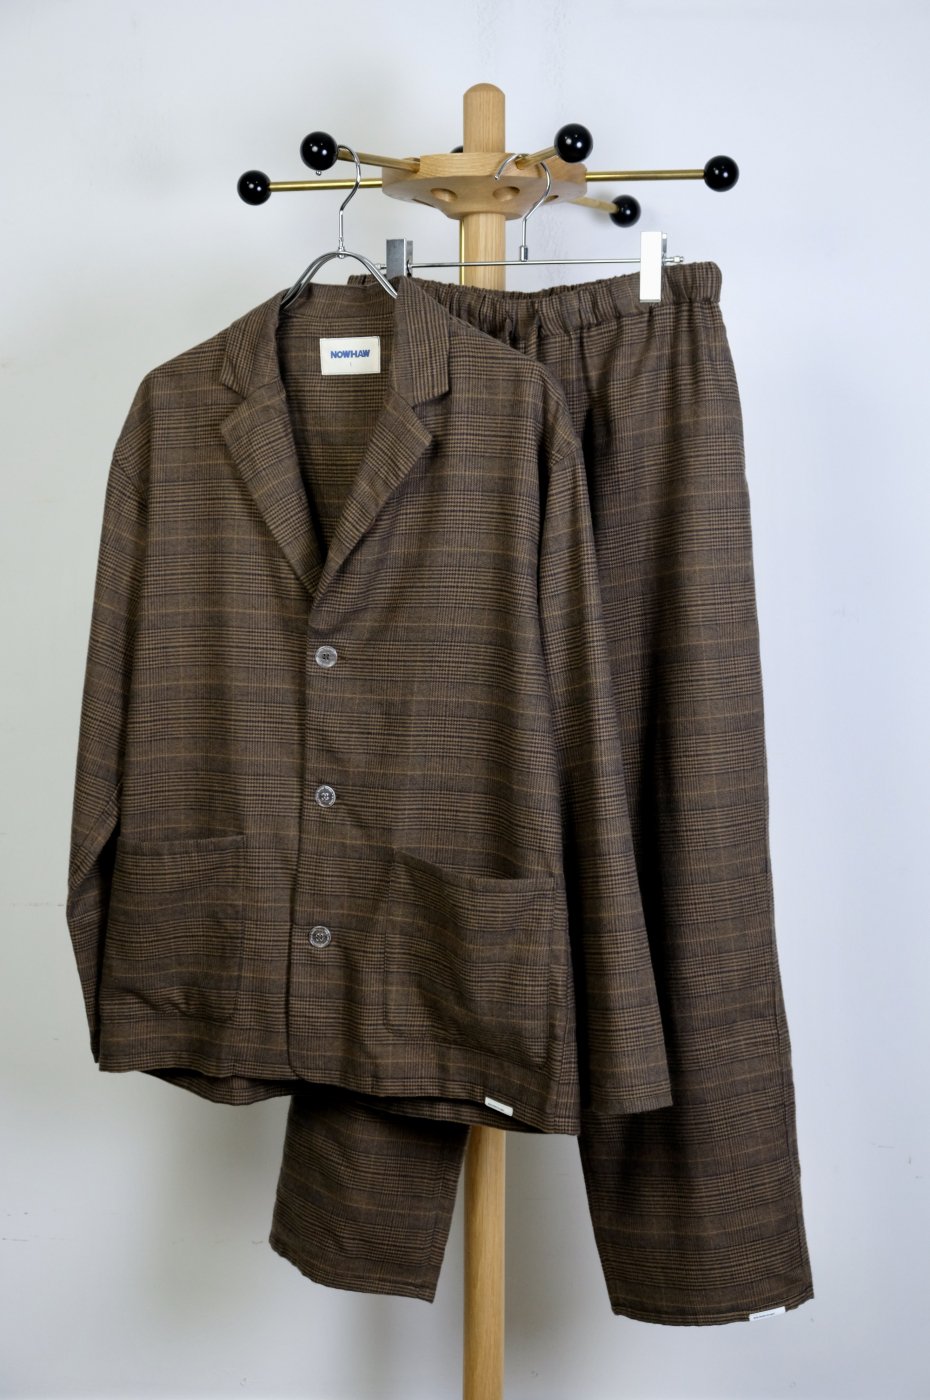 NOWHAW ノウハウ-DAY PAJAMA COTTON WOOL GREN CHECK-BROWN-